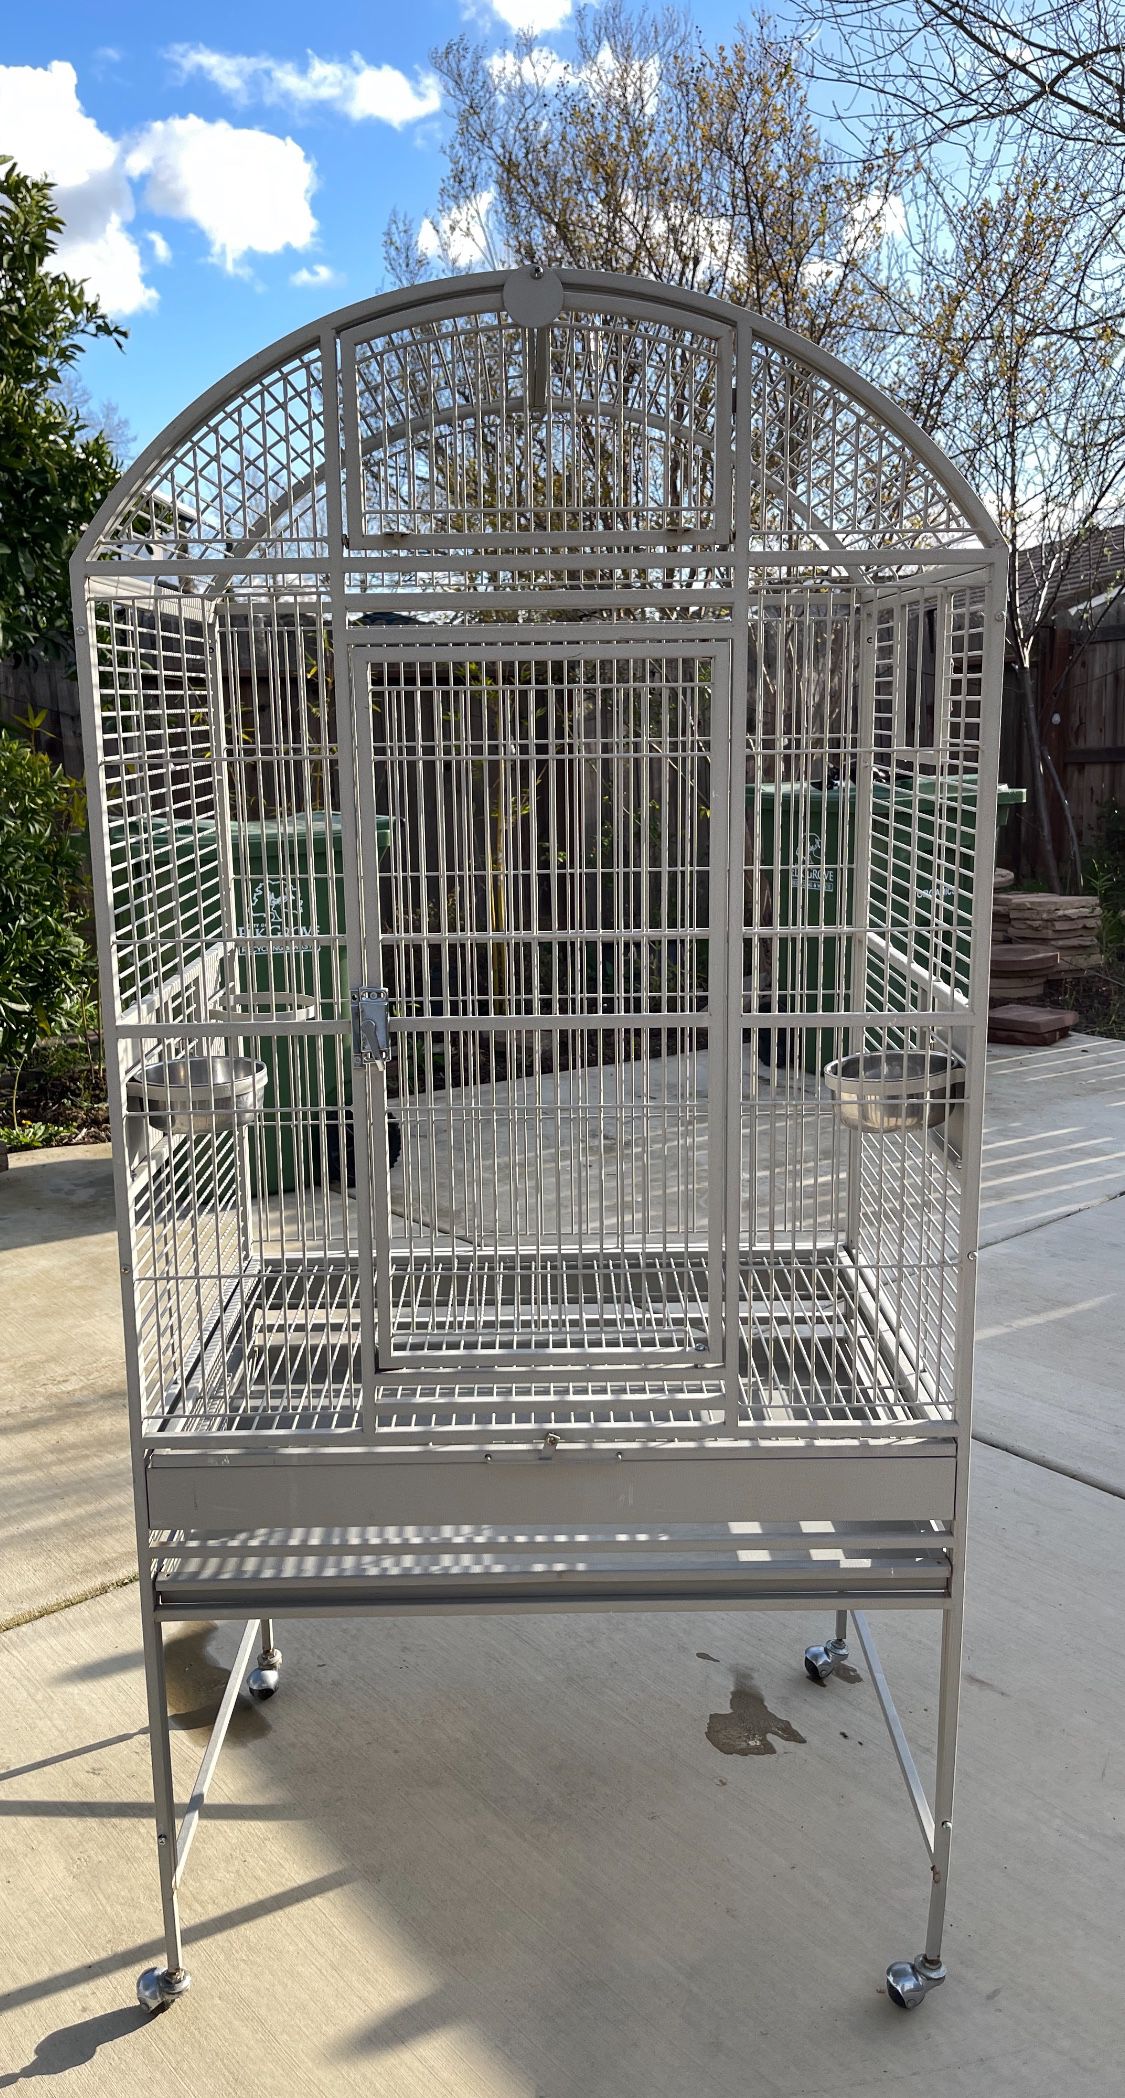 Large Parrot Or Bird Cage 